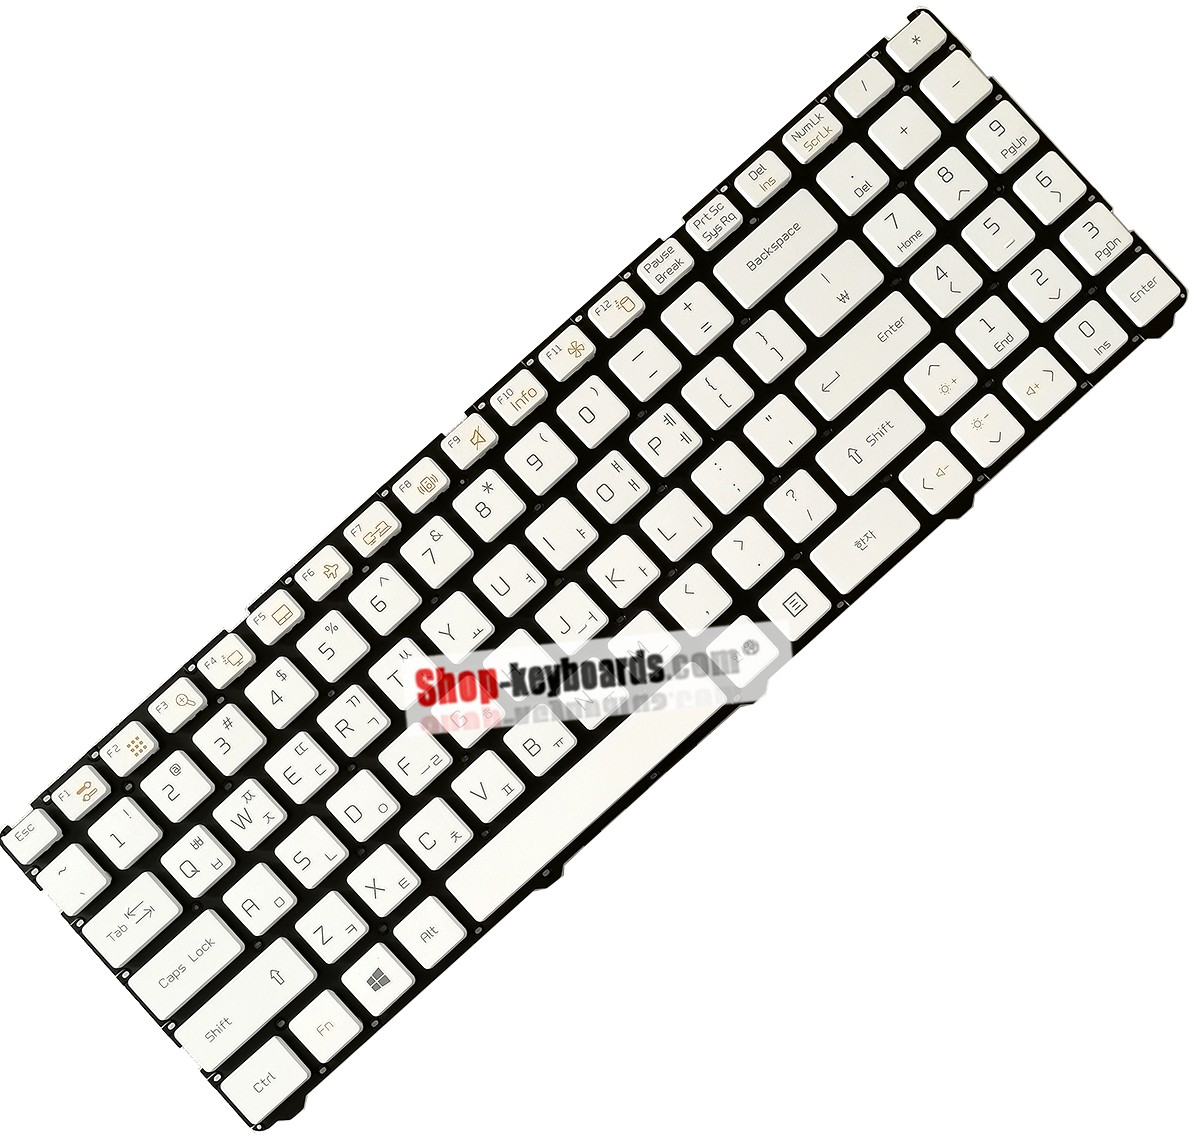 LG MP-12K73A0-9207 Keyboard replacement